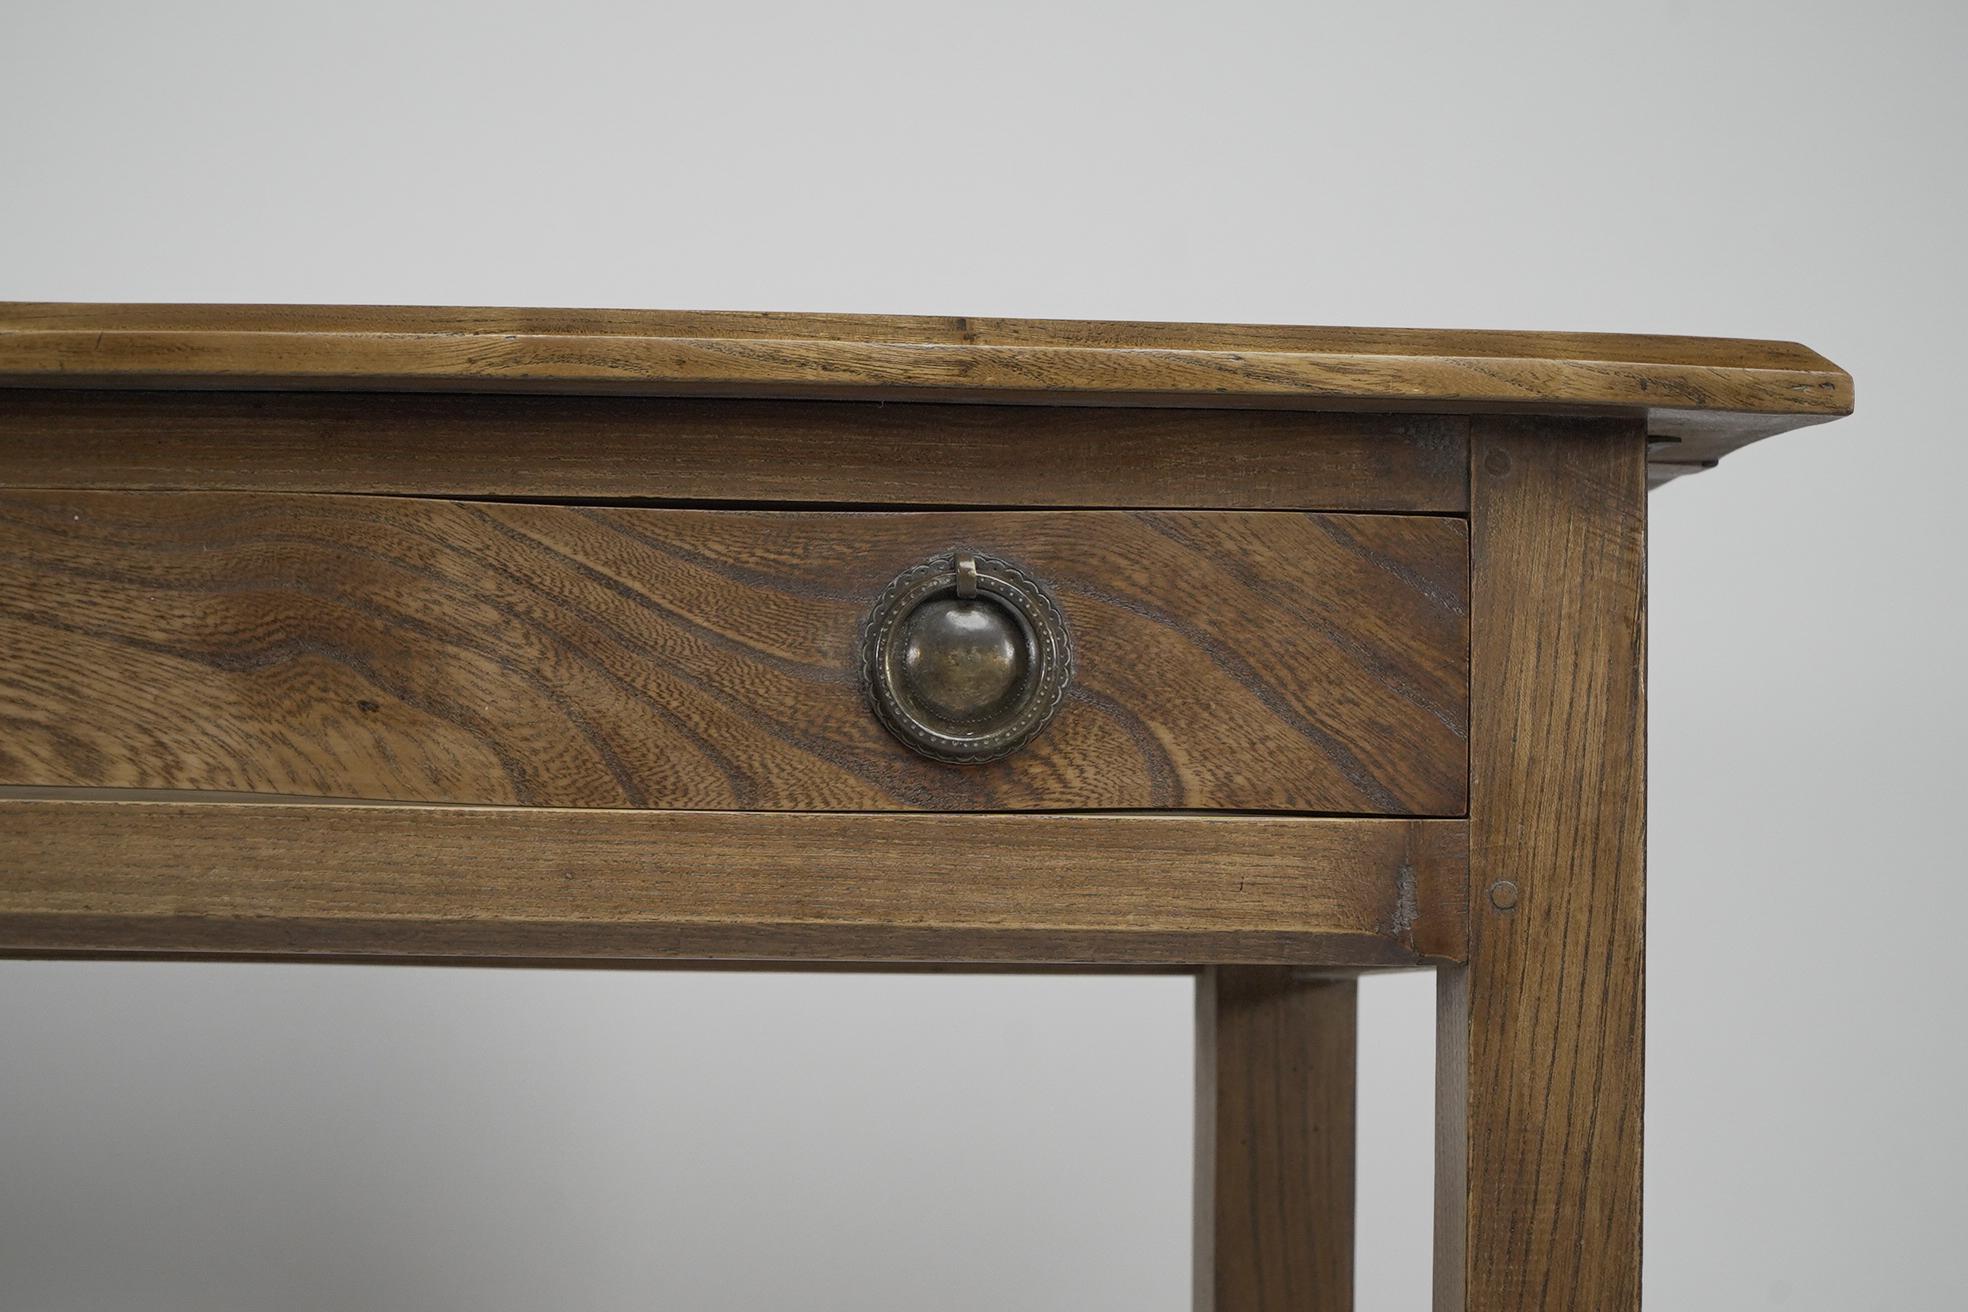 English Gordon Russell. A fine quality Cotswold School ash single drawer desk For Sale